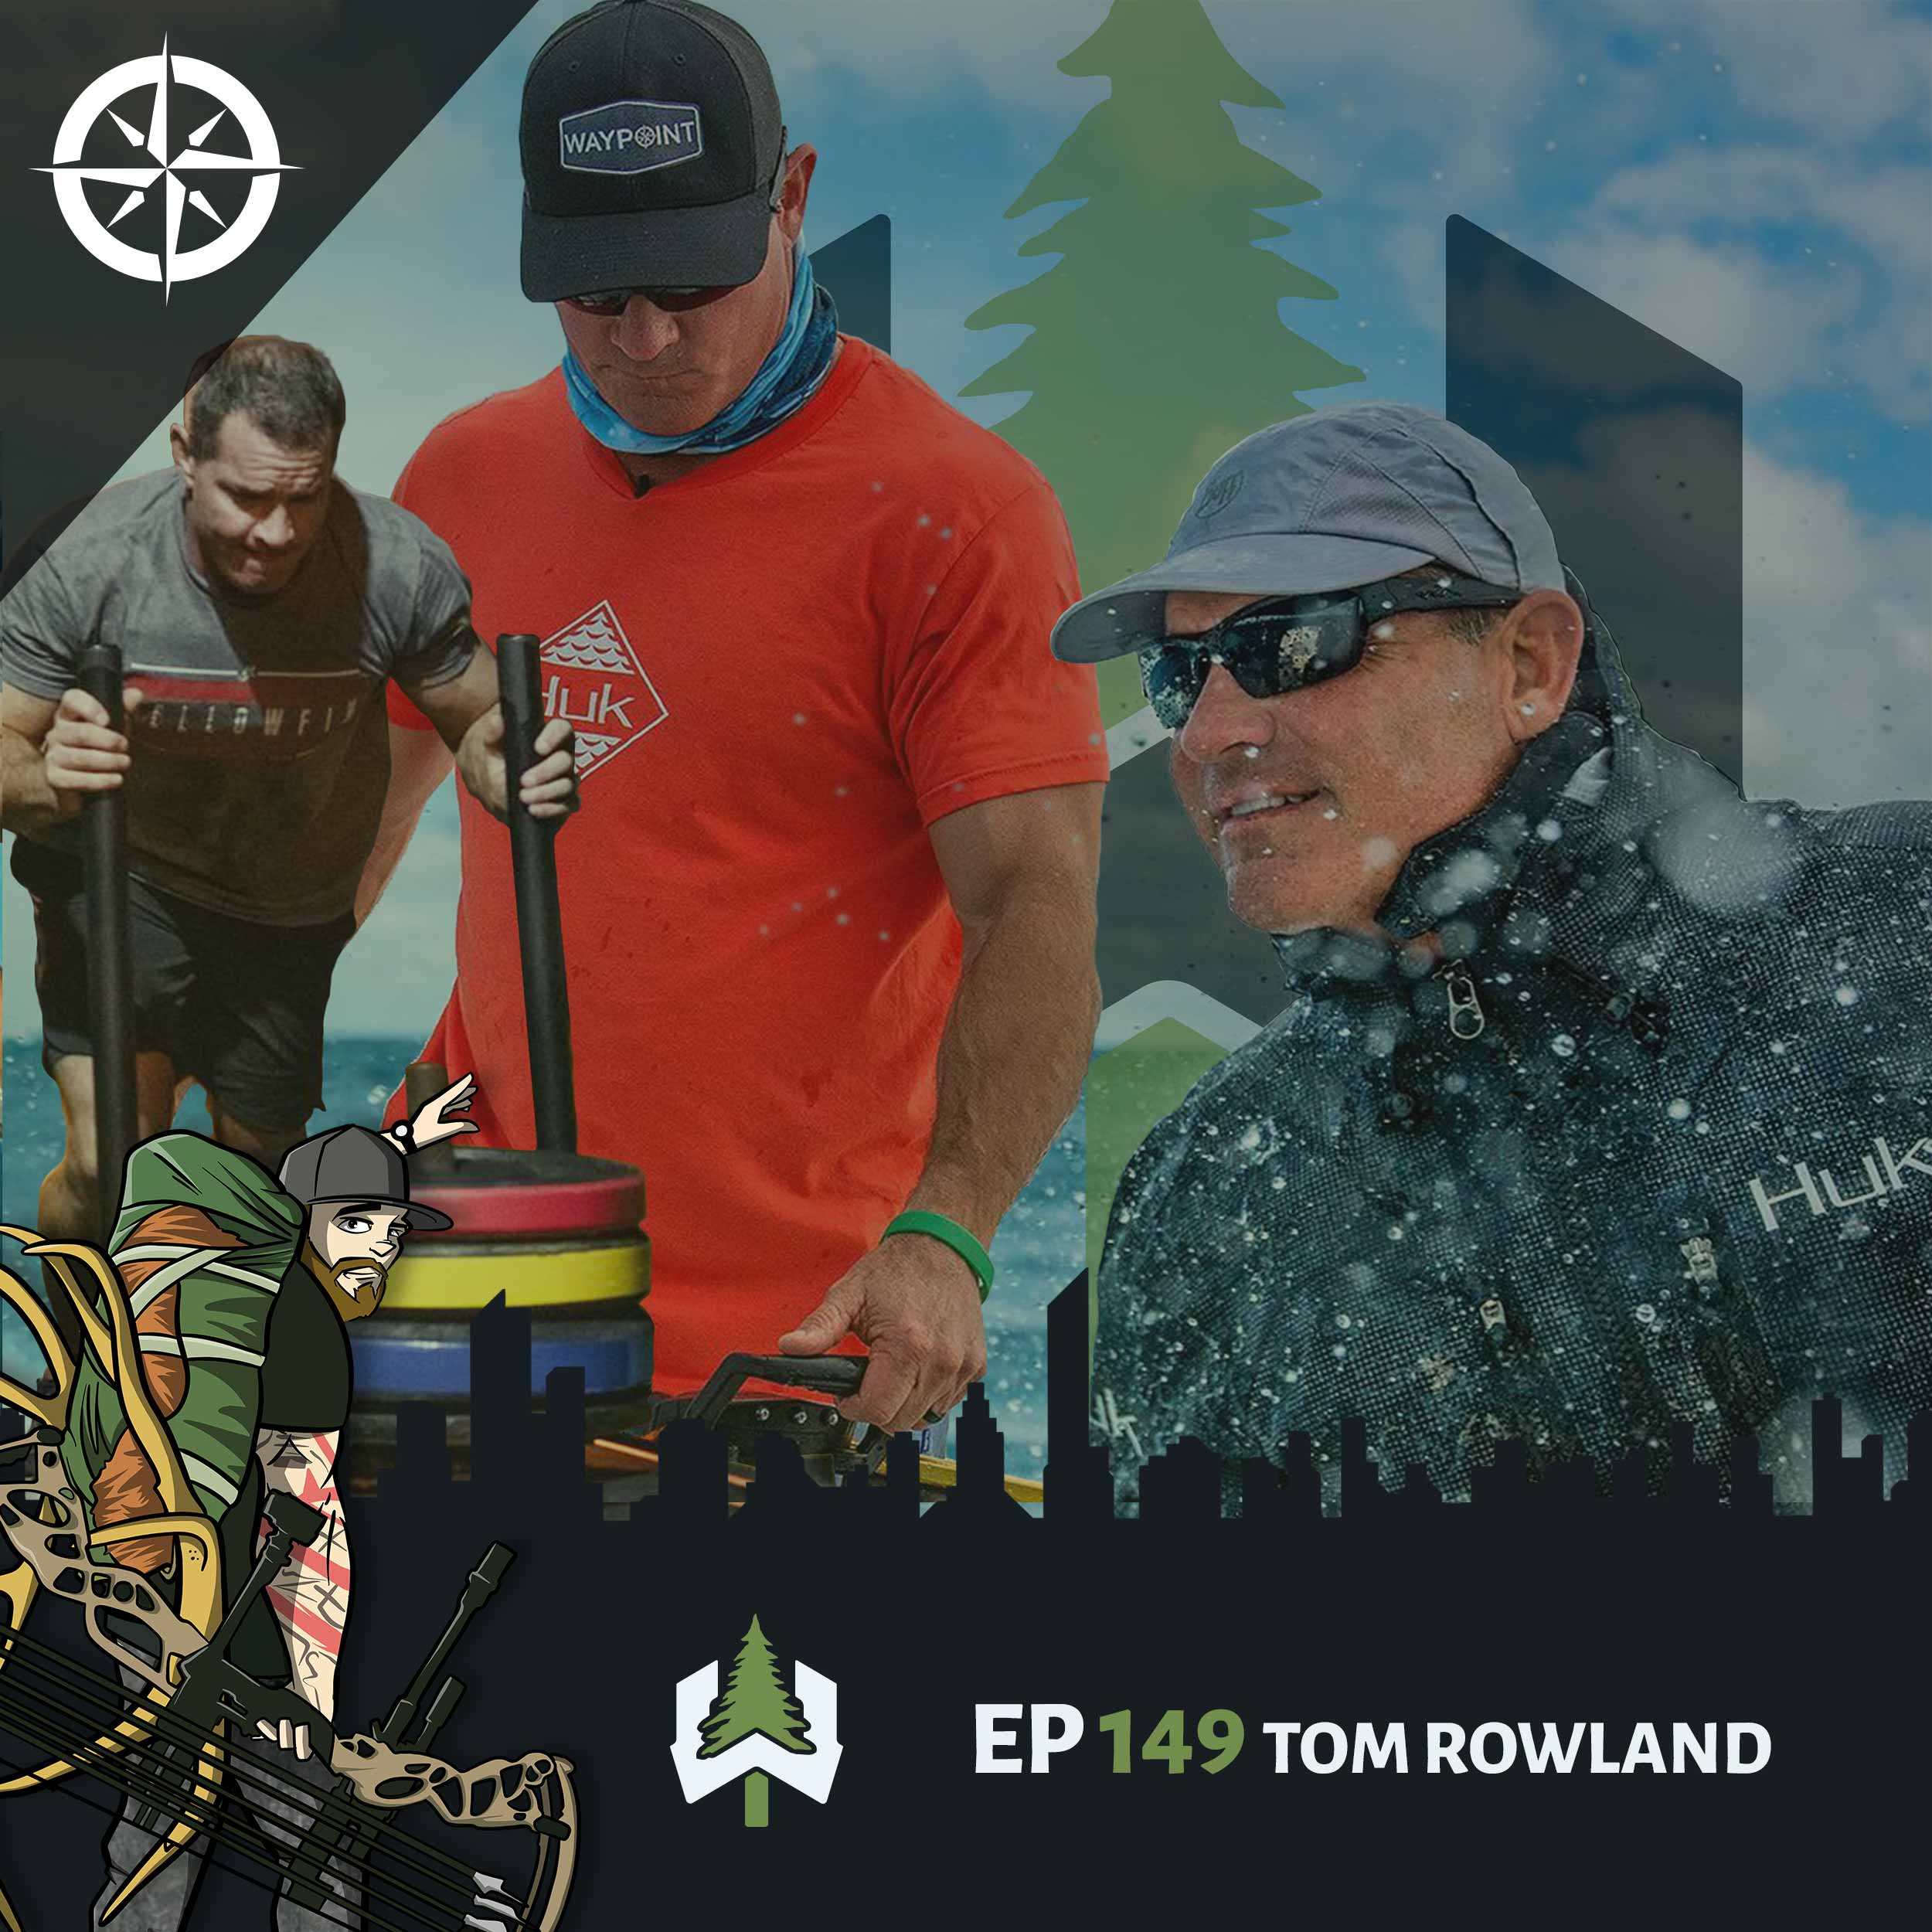 Ep 149 - Tom Rowland: Capable for Your Family, Your Future and the Outdoors